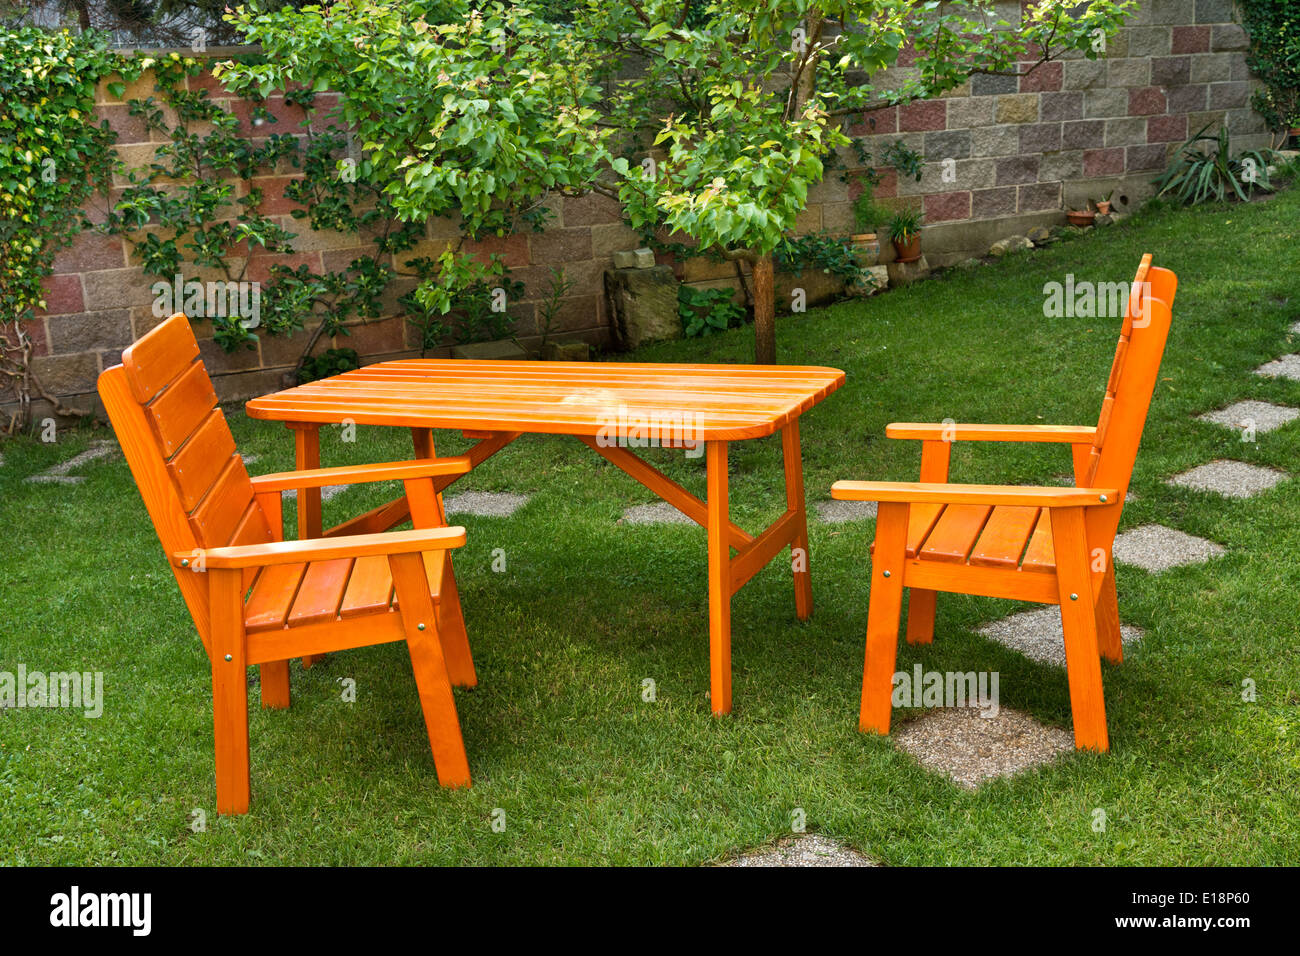 a deska and two chairs in the garden Stock Photo